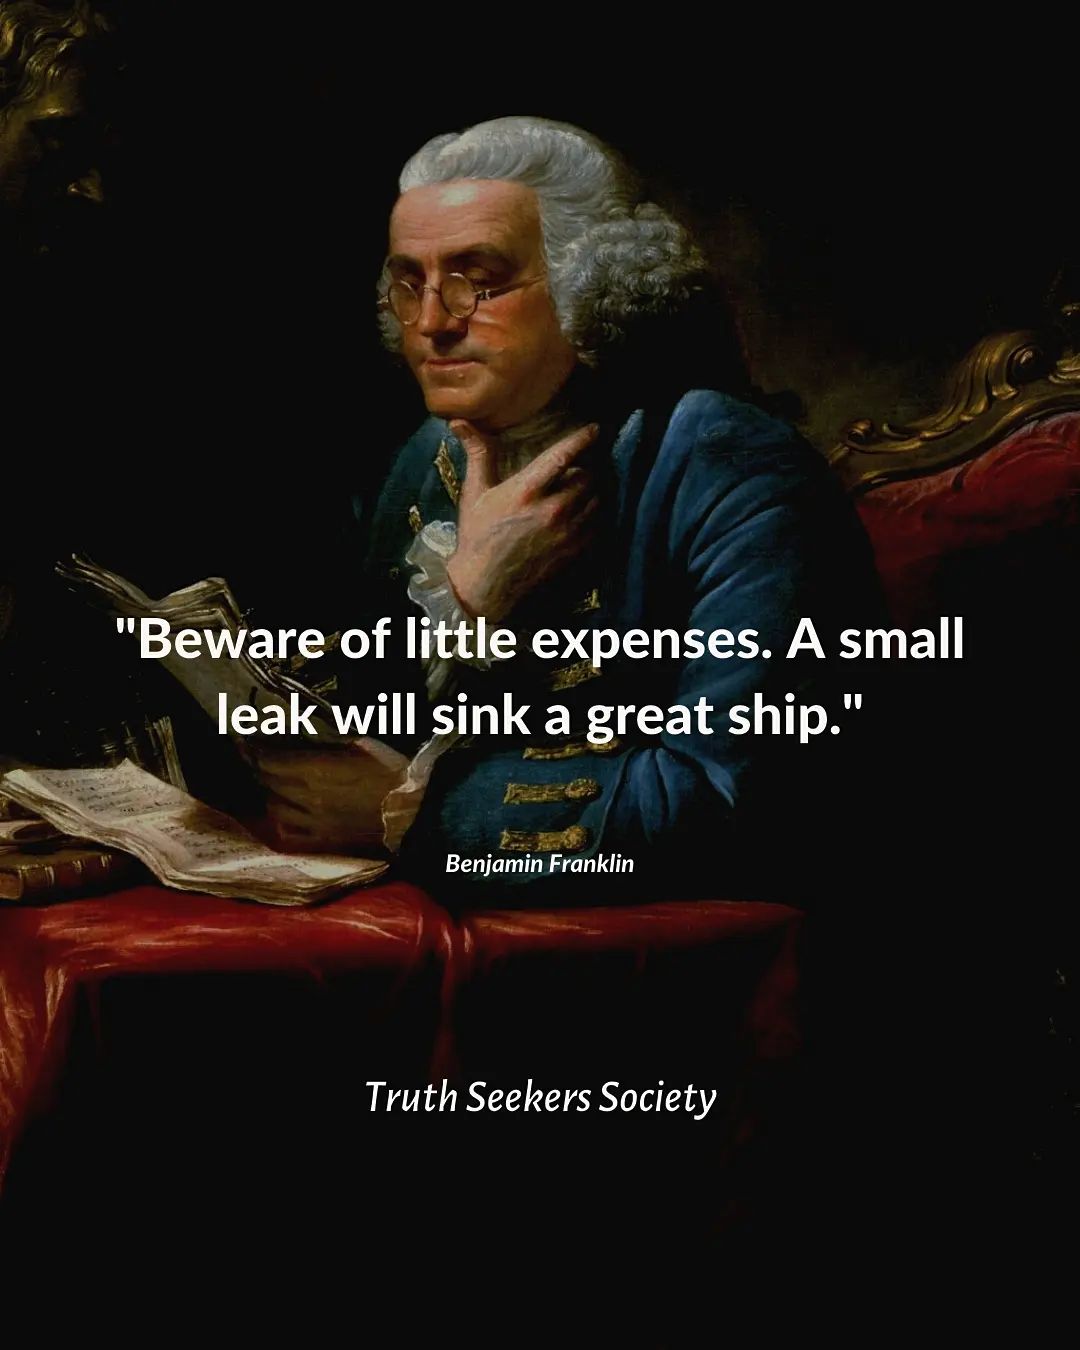 Beware of little expenses a small leak will sink a great ship.